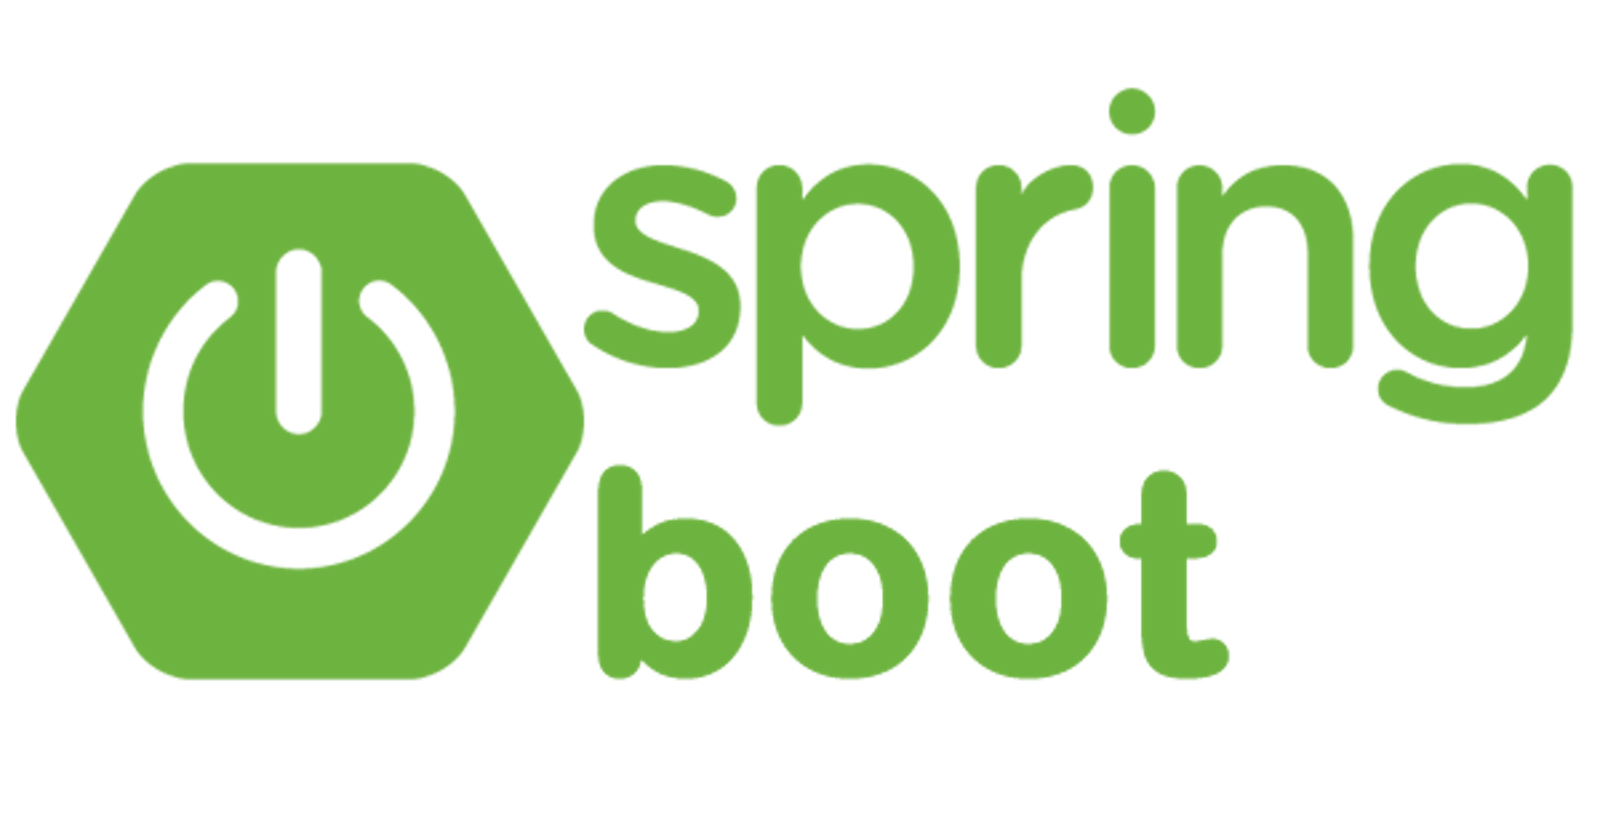 Hello World in Spring Boot